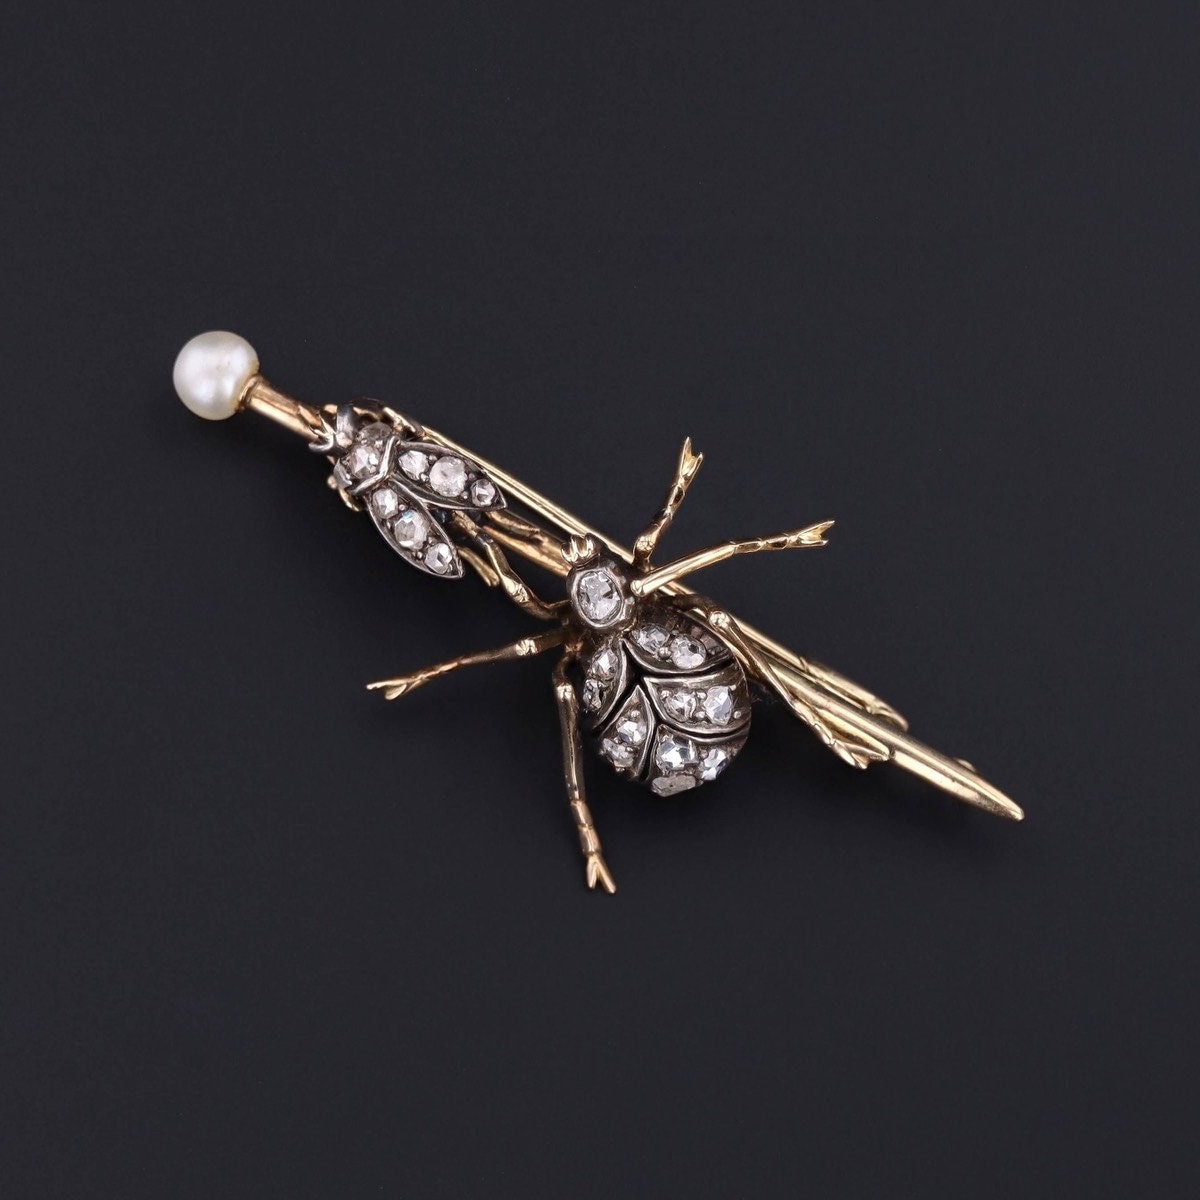 Victorian Diamond Insect Brooch Silver Topped 14k Gold